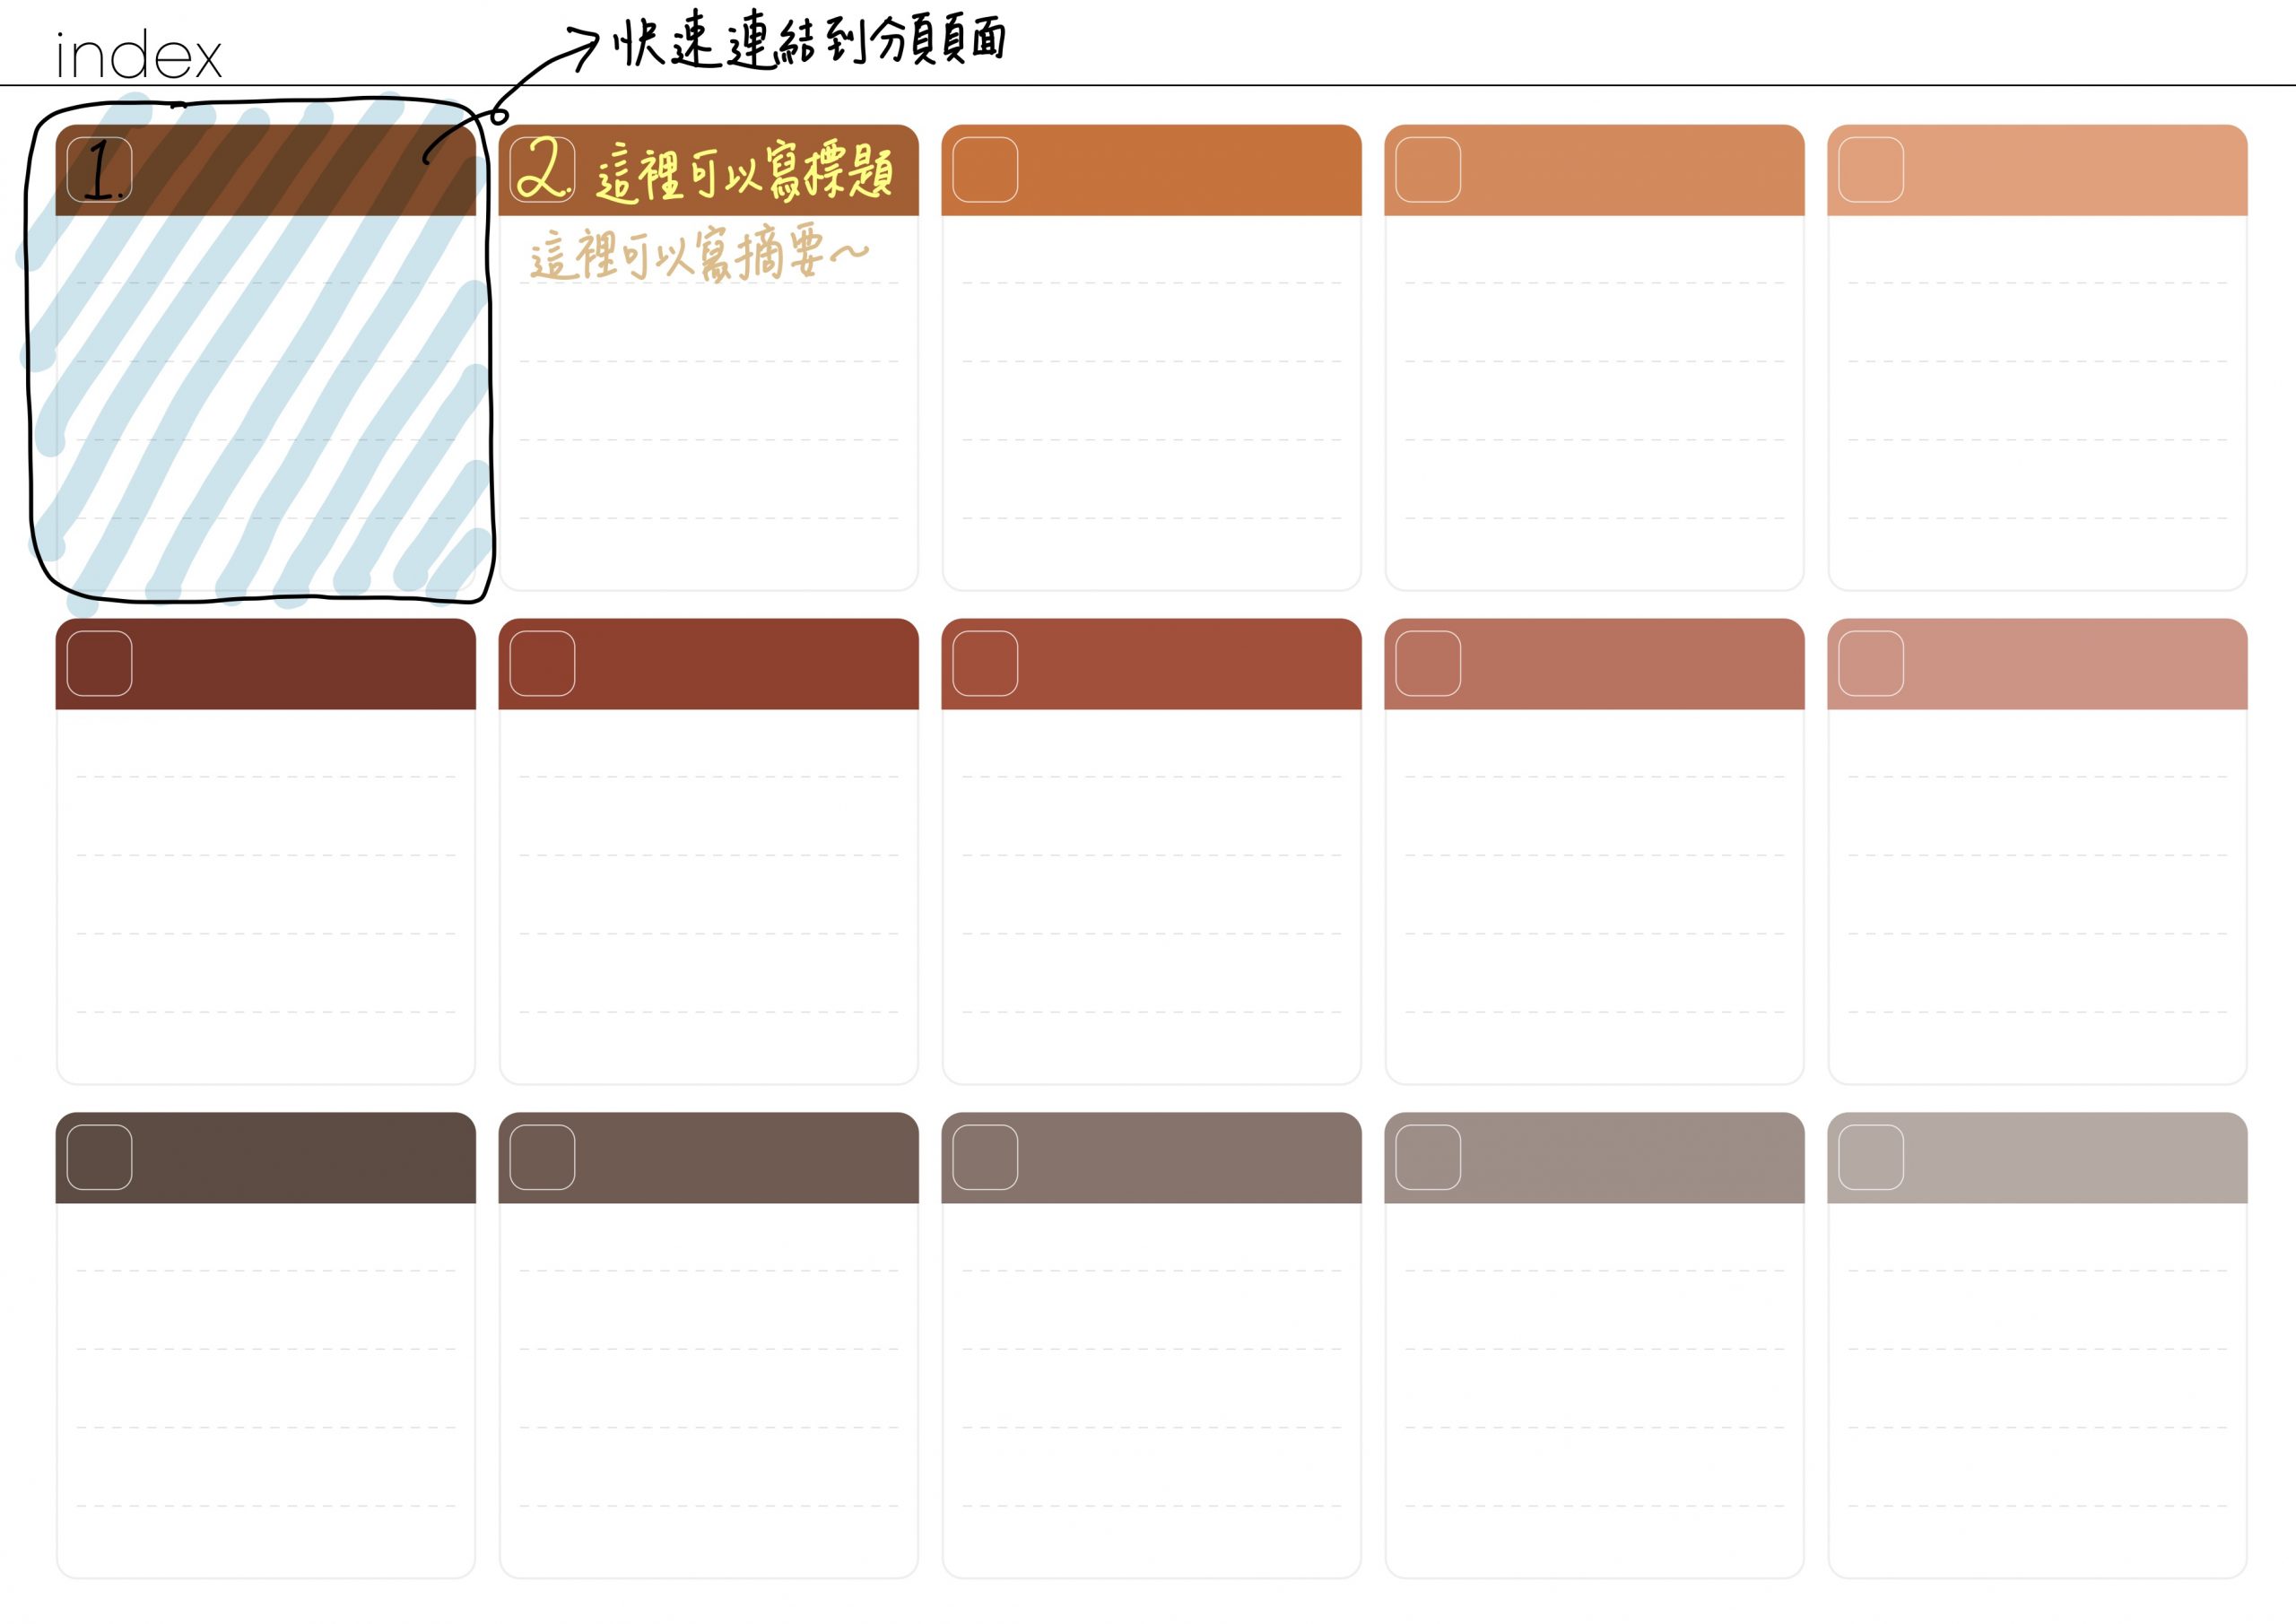 Notebook-Landscape-Solid Color Cover-15 Tabs-Toffee And Chocolate-White Mode 索引手寫說明 | me.Learning